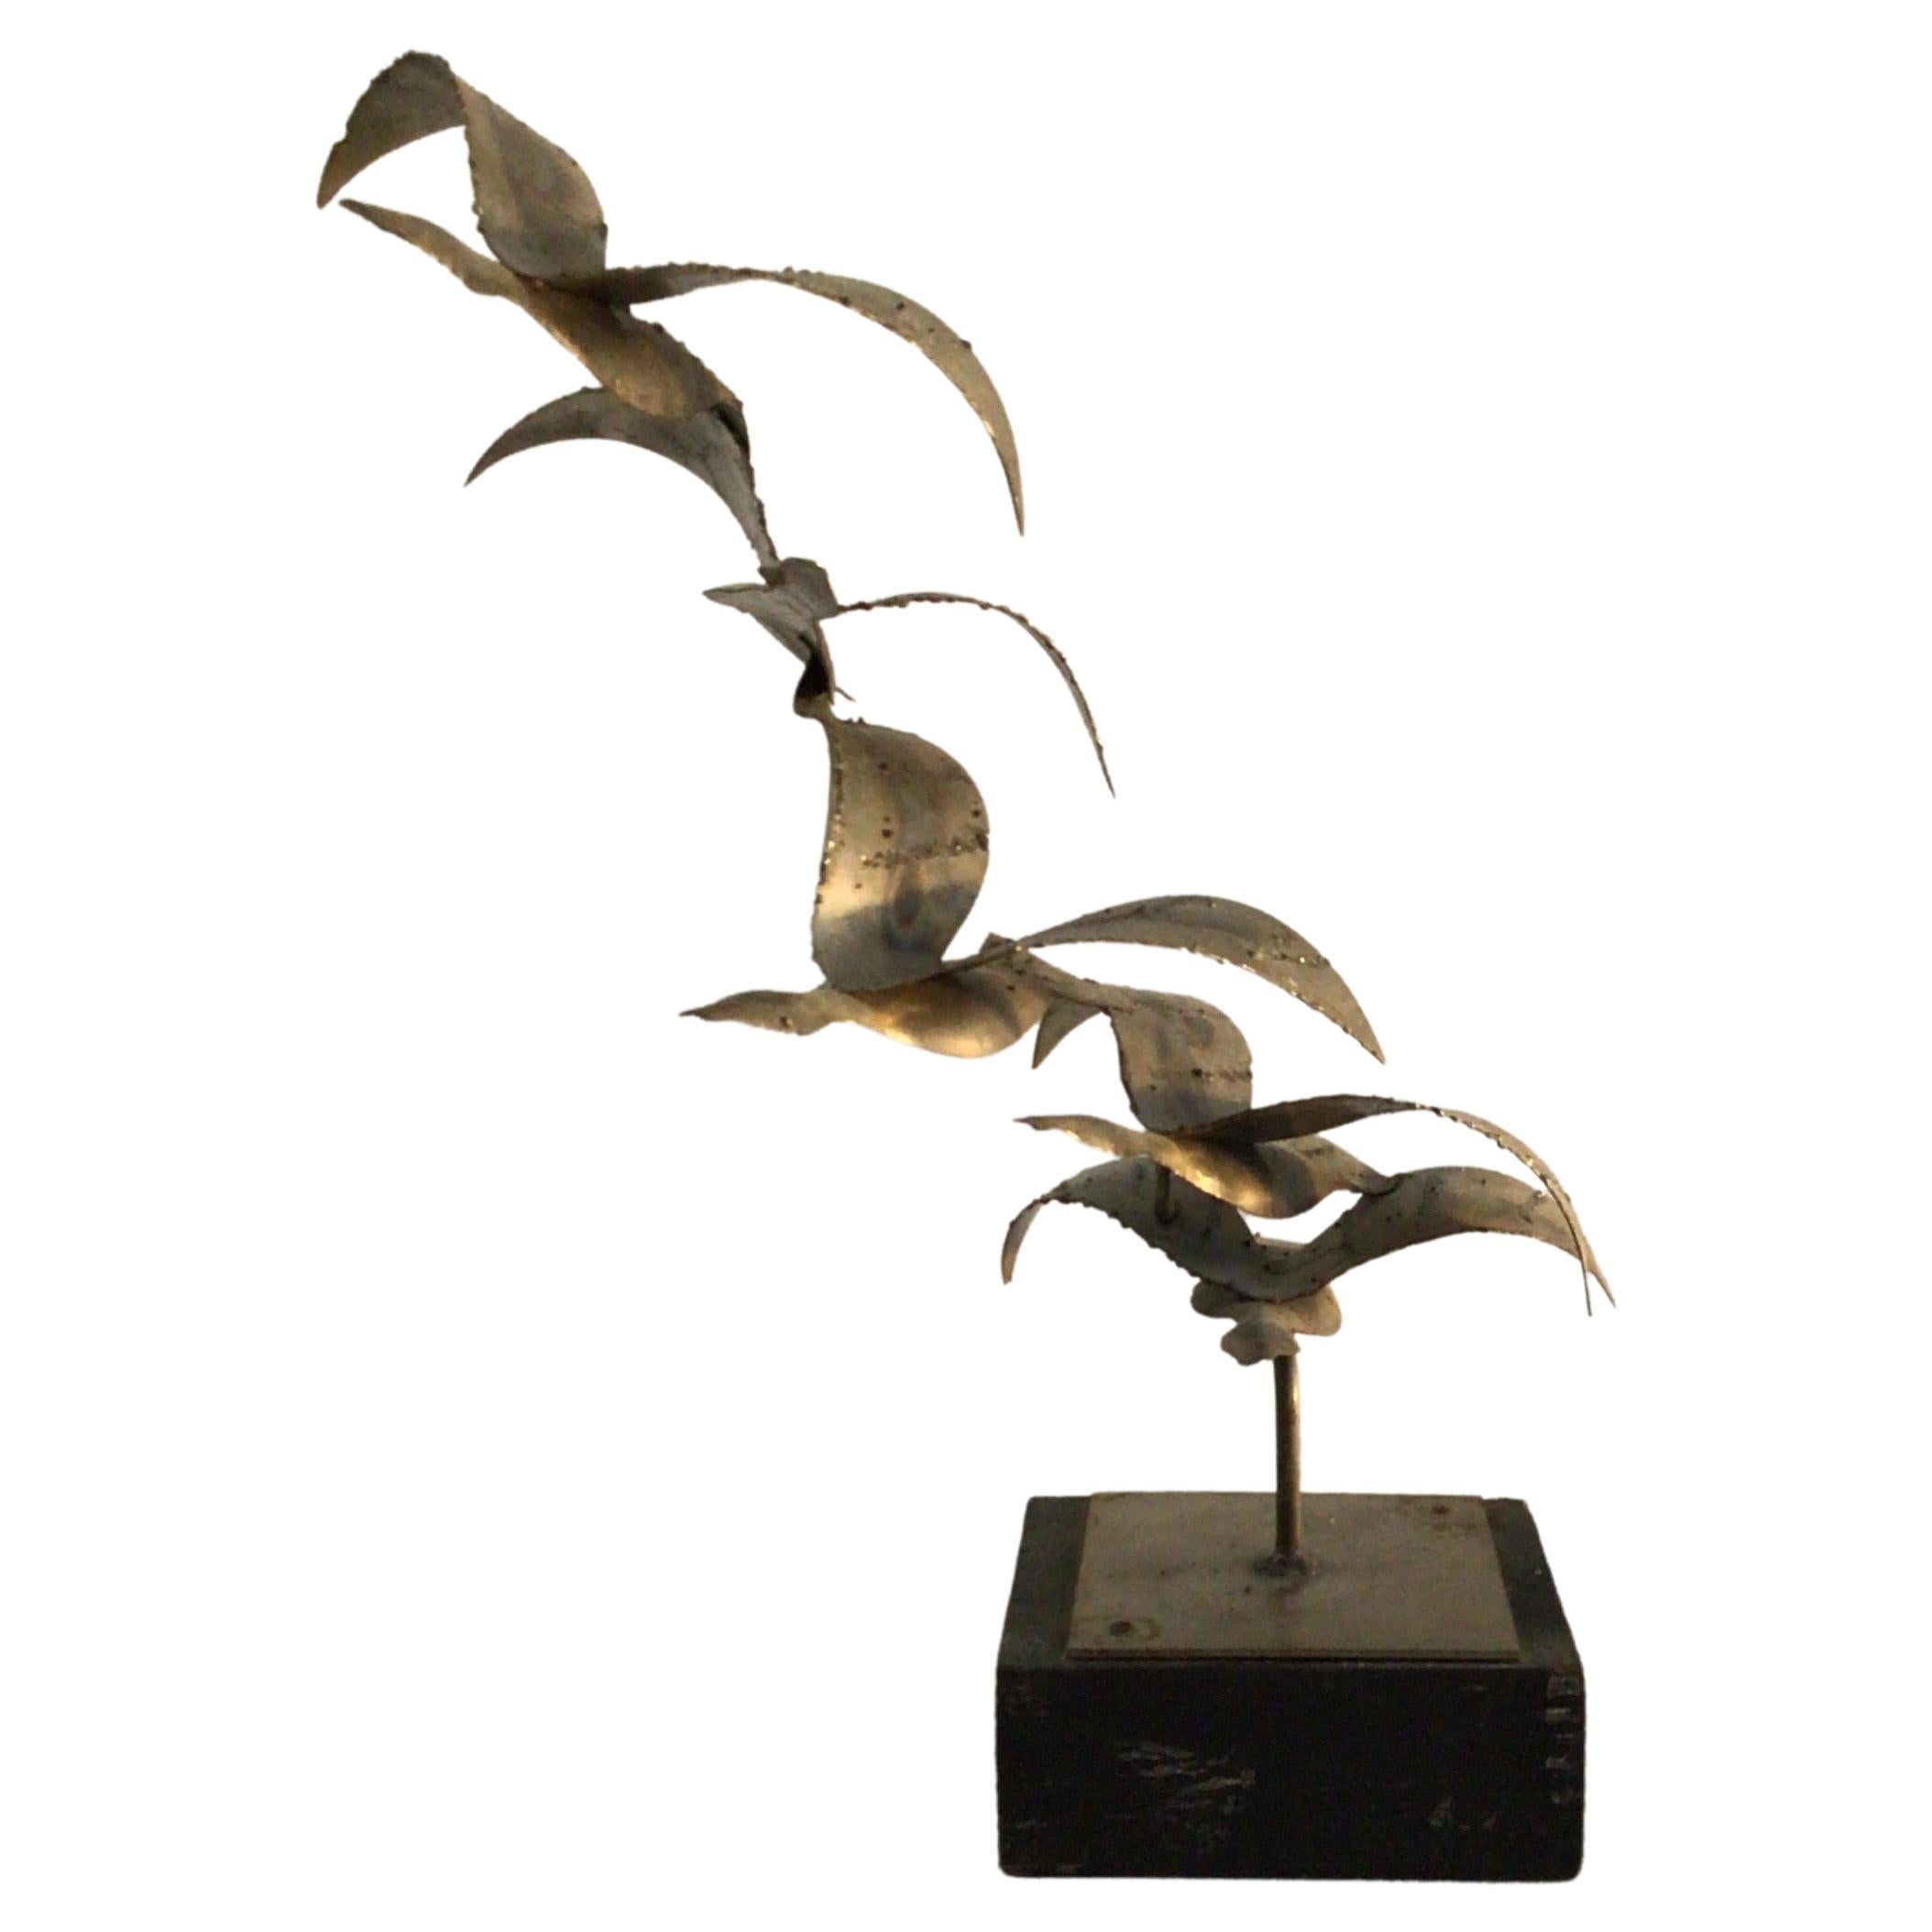 1970s Chrome Sculpture of Birds in Flight on Painted Wood Base